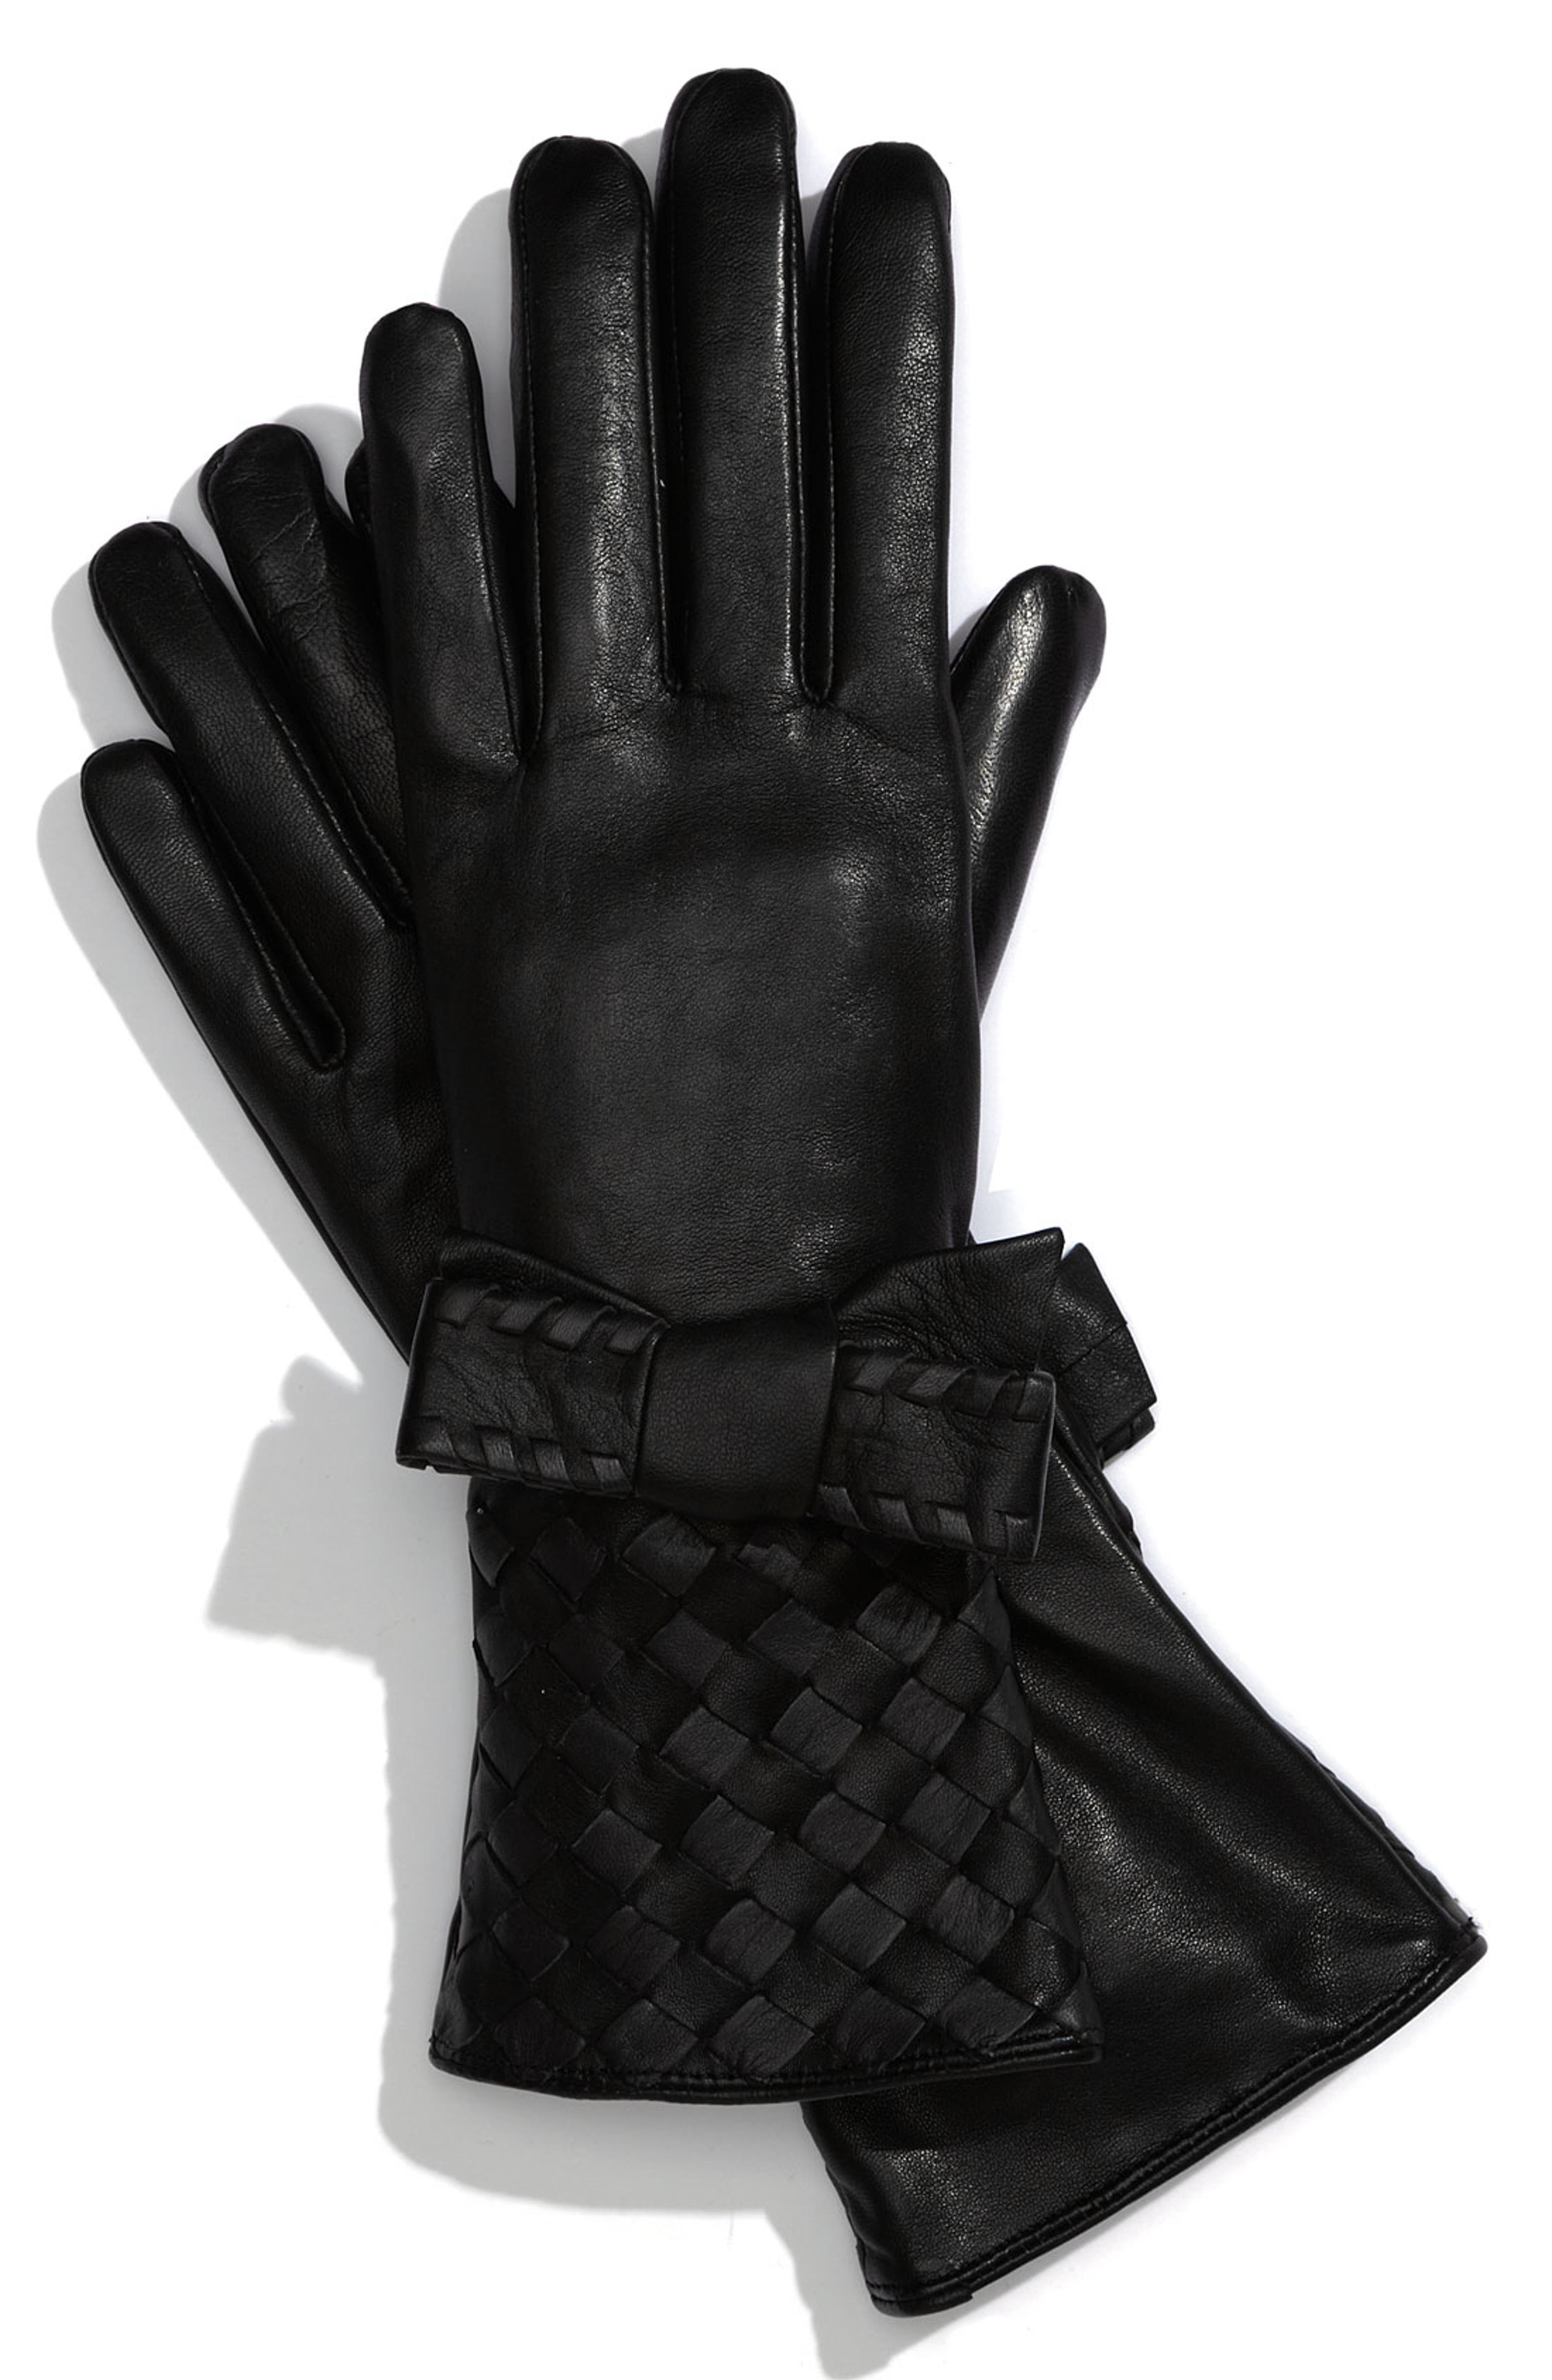 Vince Camuto 'Woven Whipstitch Bow' Leather Gloves | Nordstrom